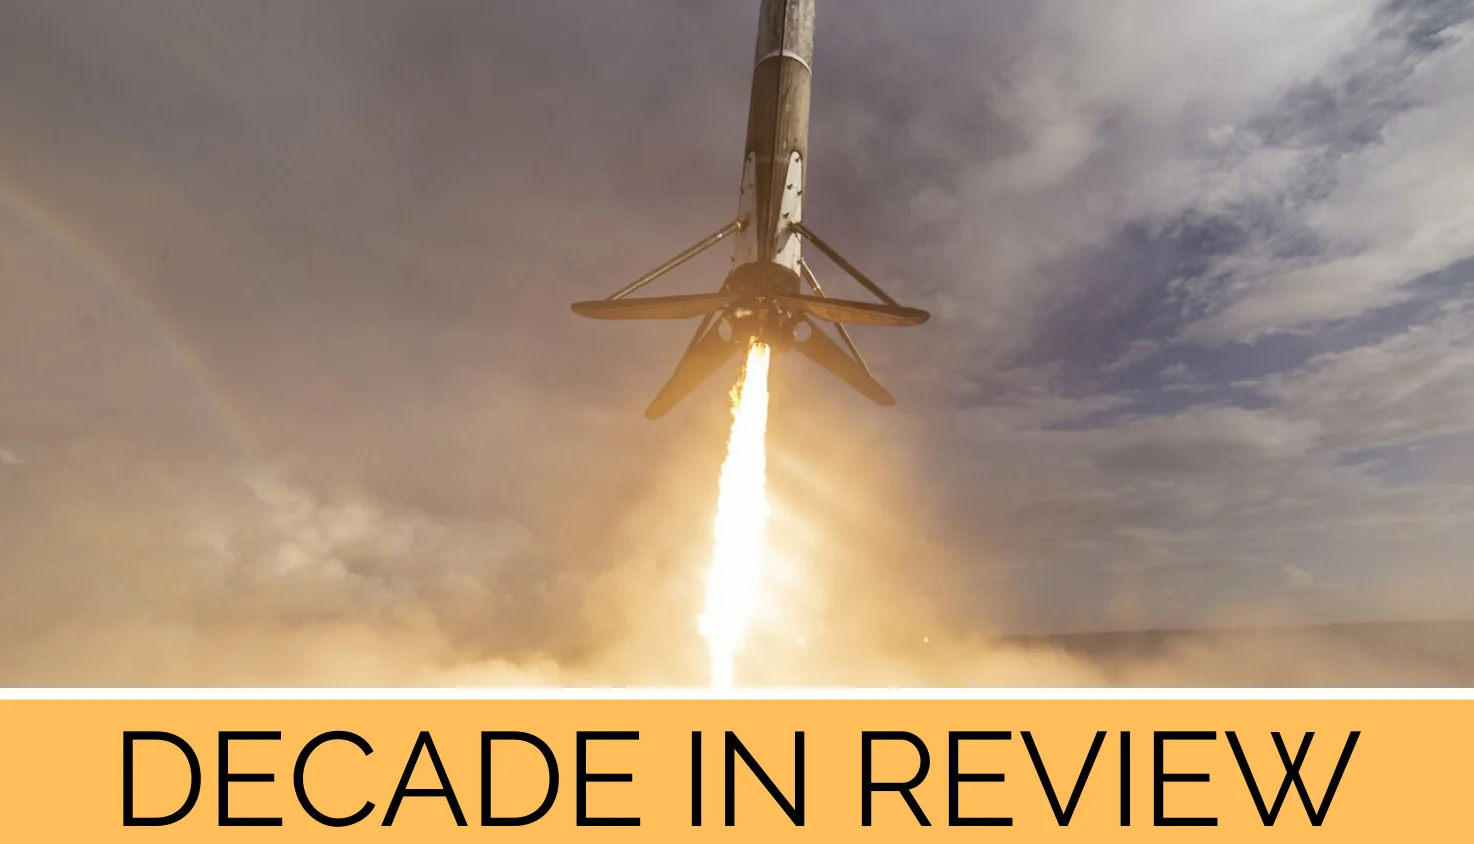 DECADE IN REVIEW: The top 10 Space stories of the past 10 years